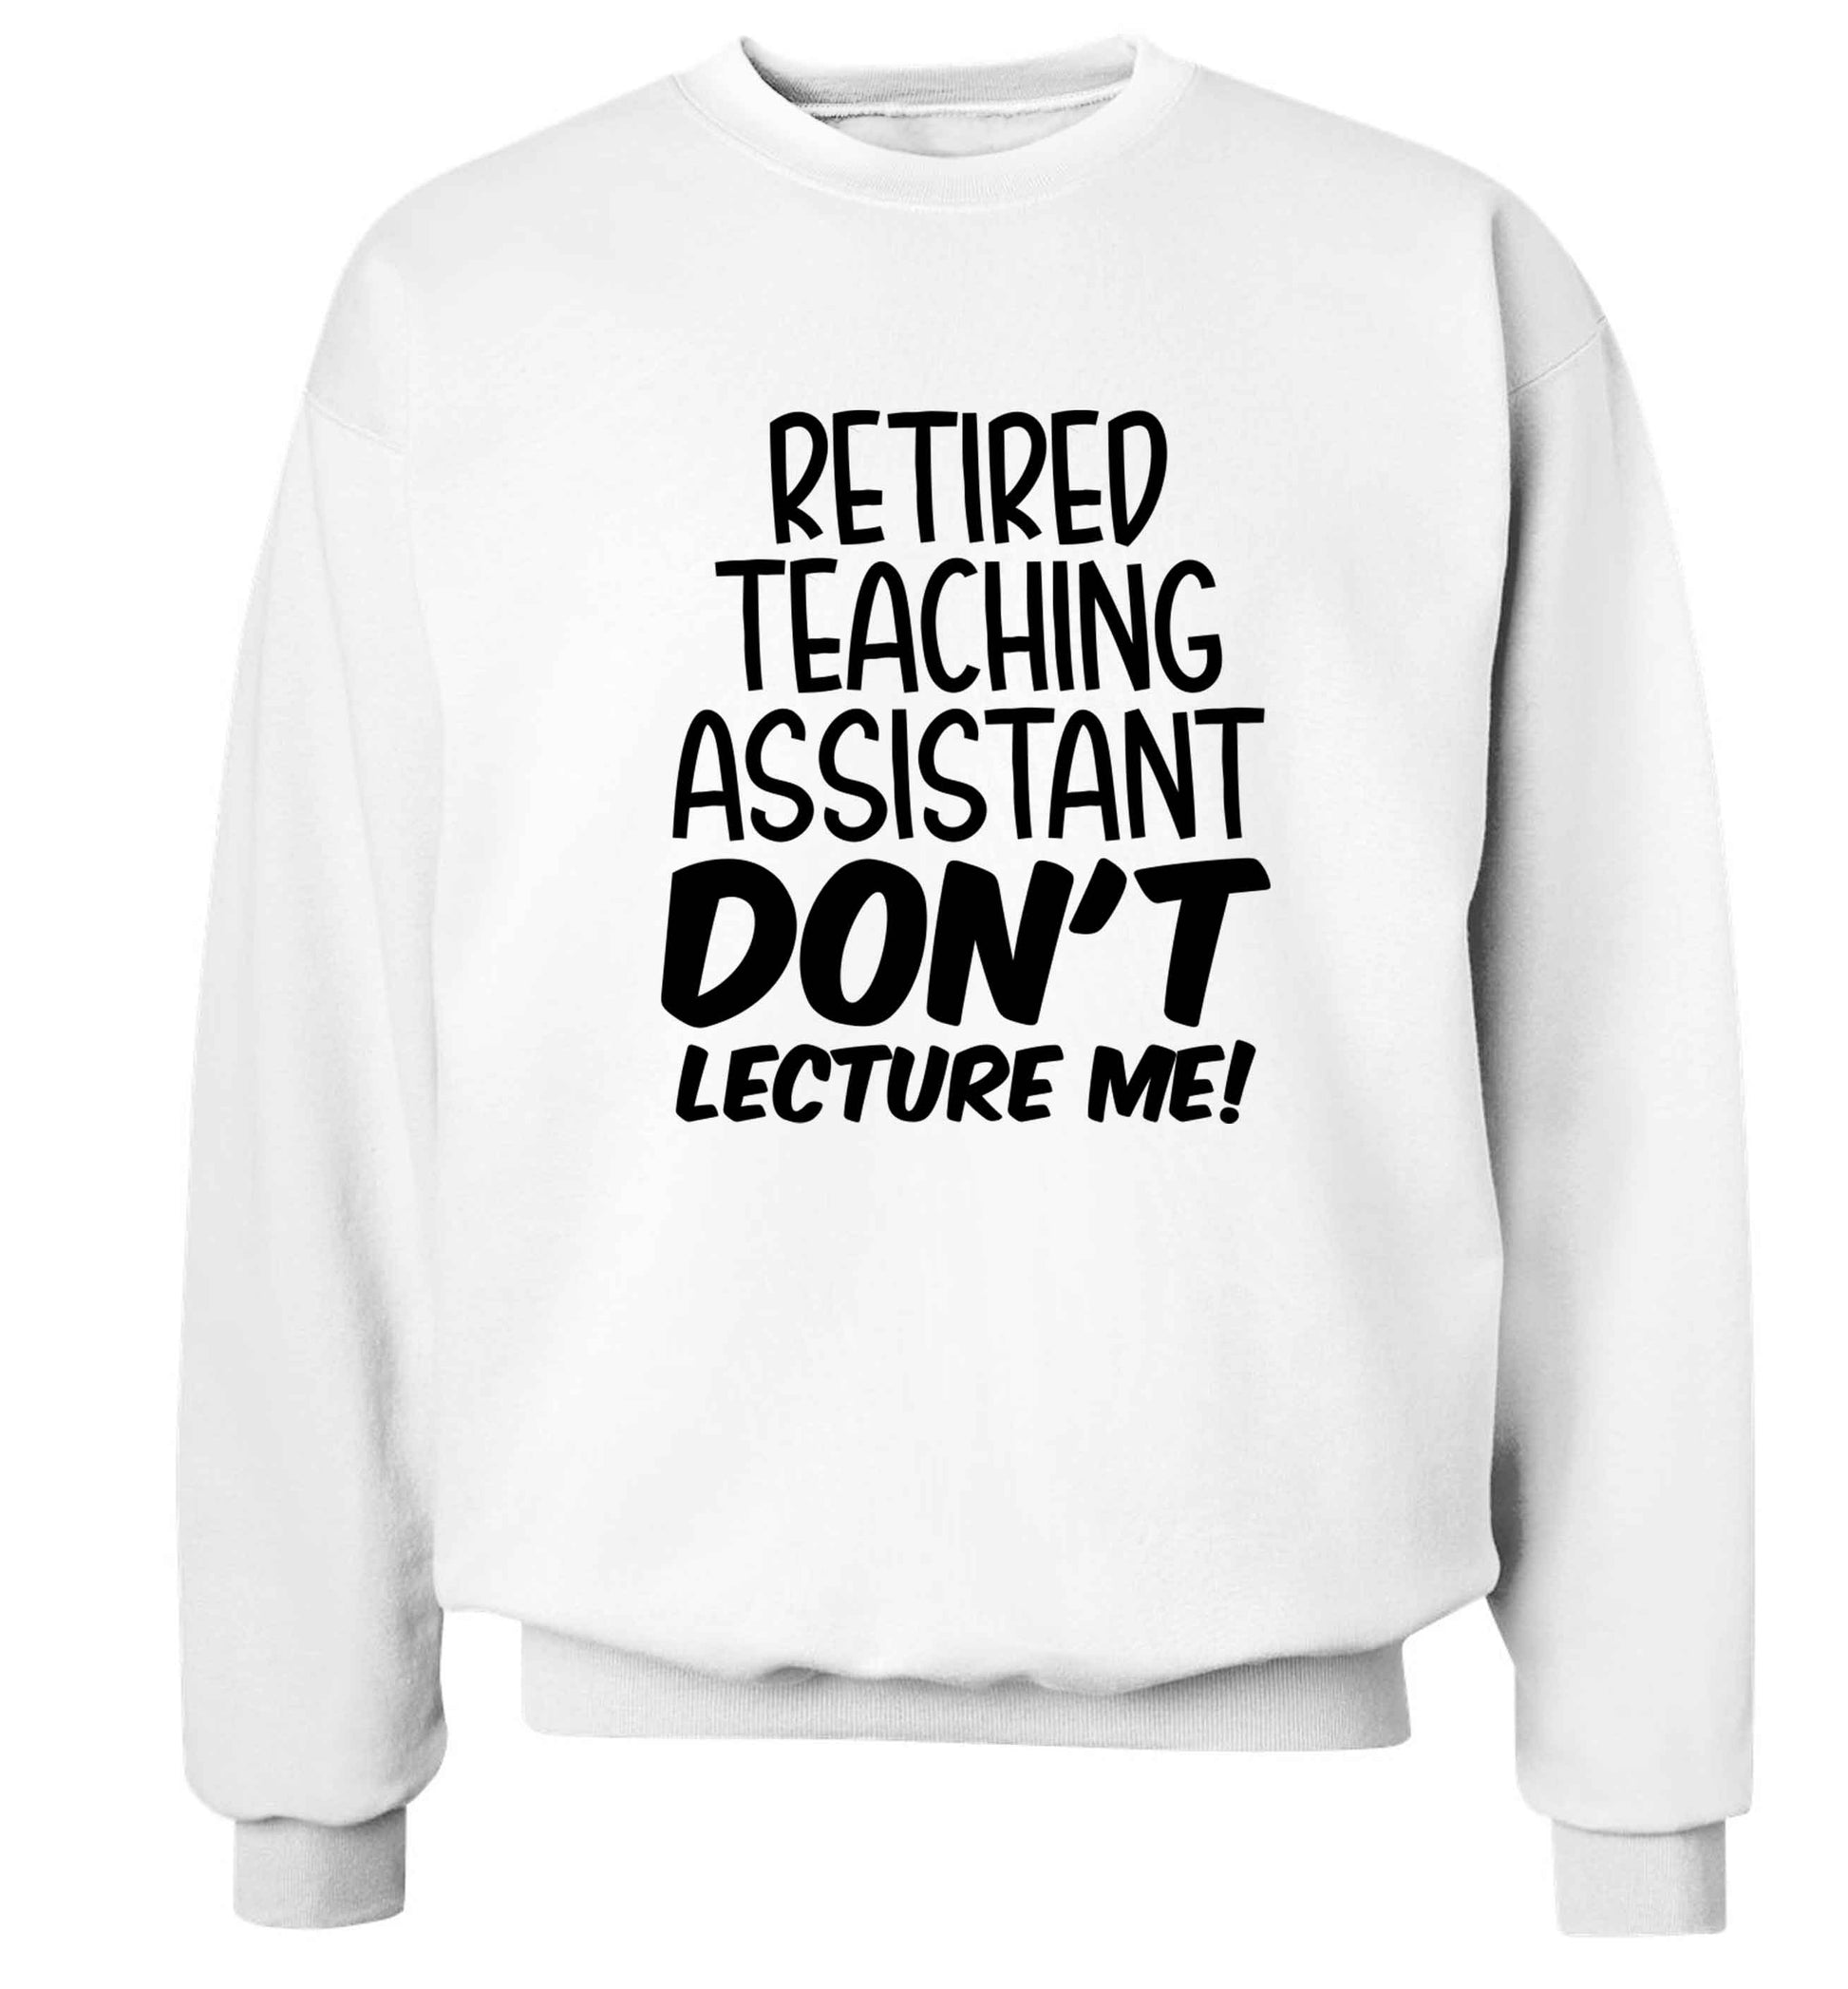 Retired teaching assistant don't lecture me Adult's unisex white Sweater 2XL